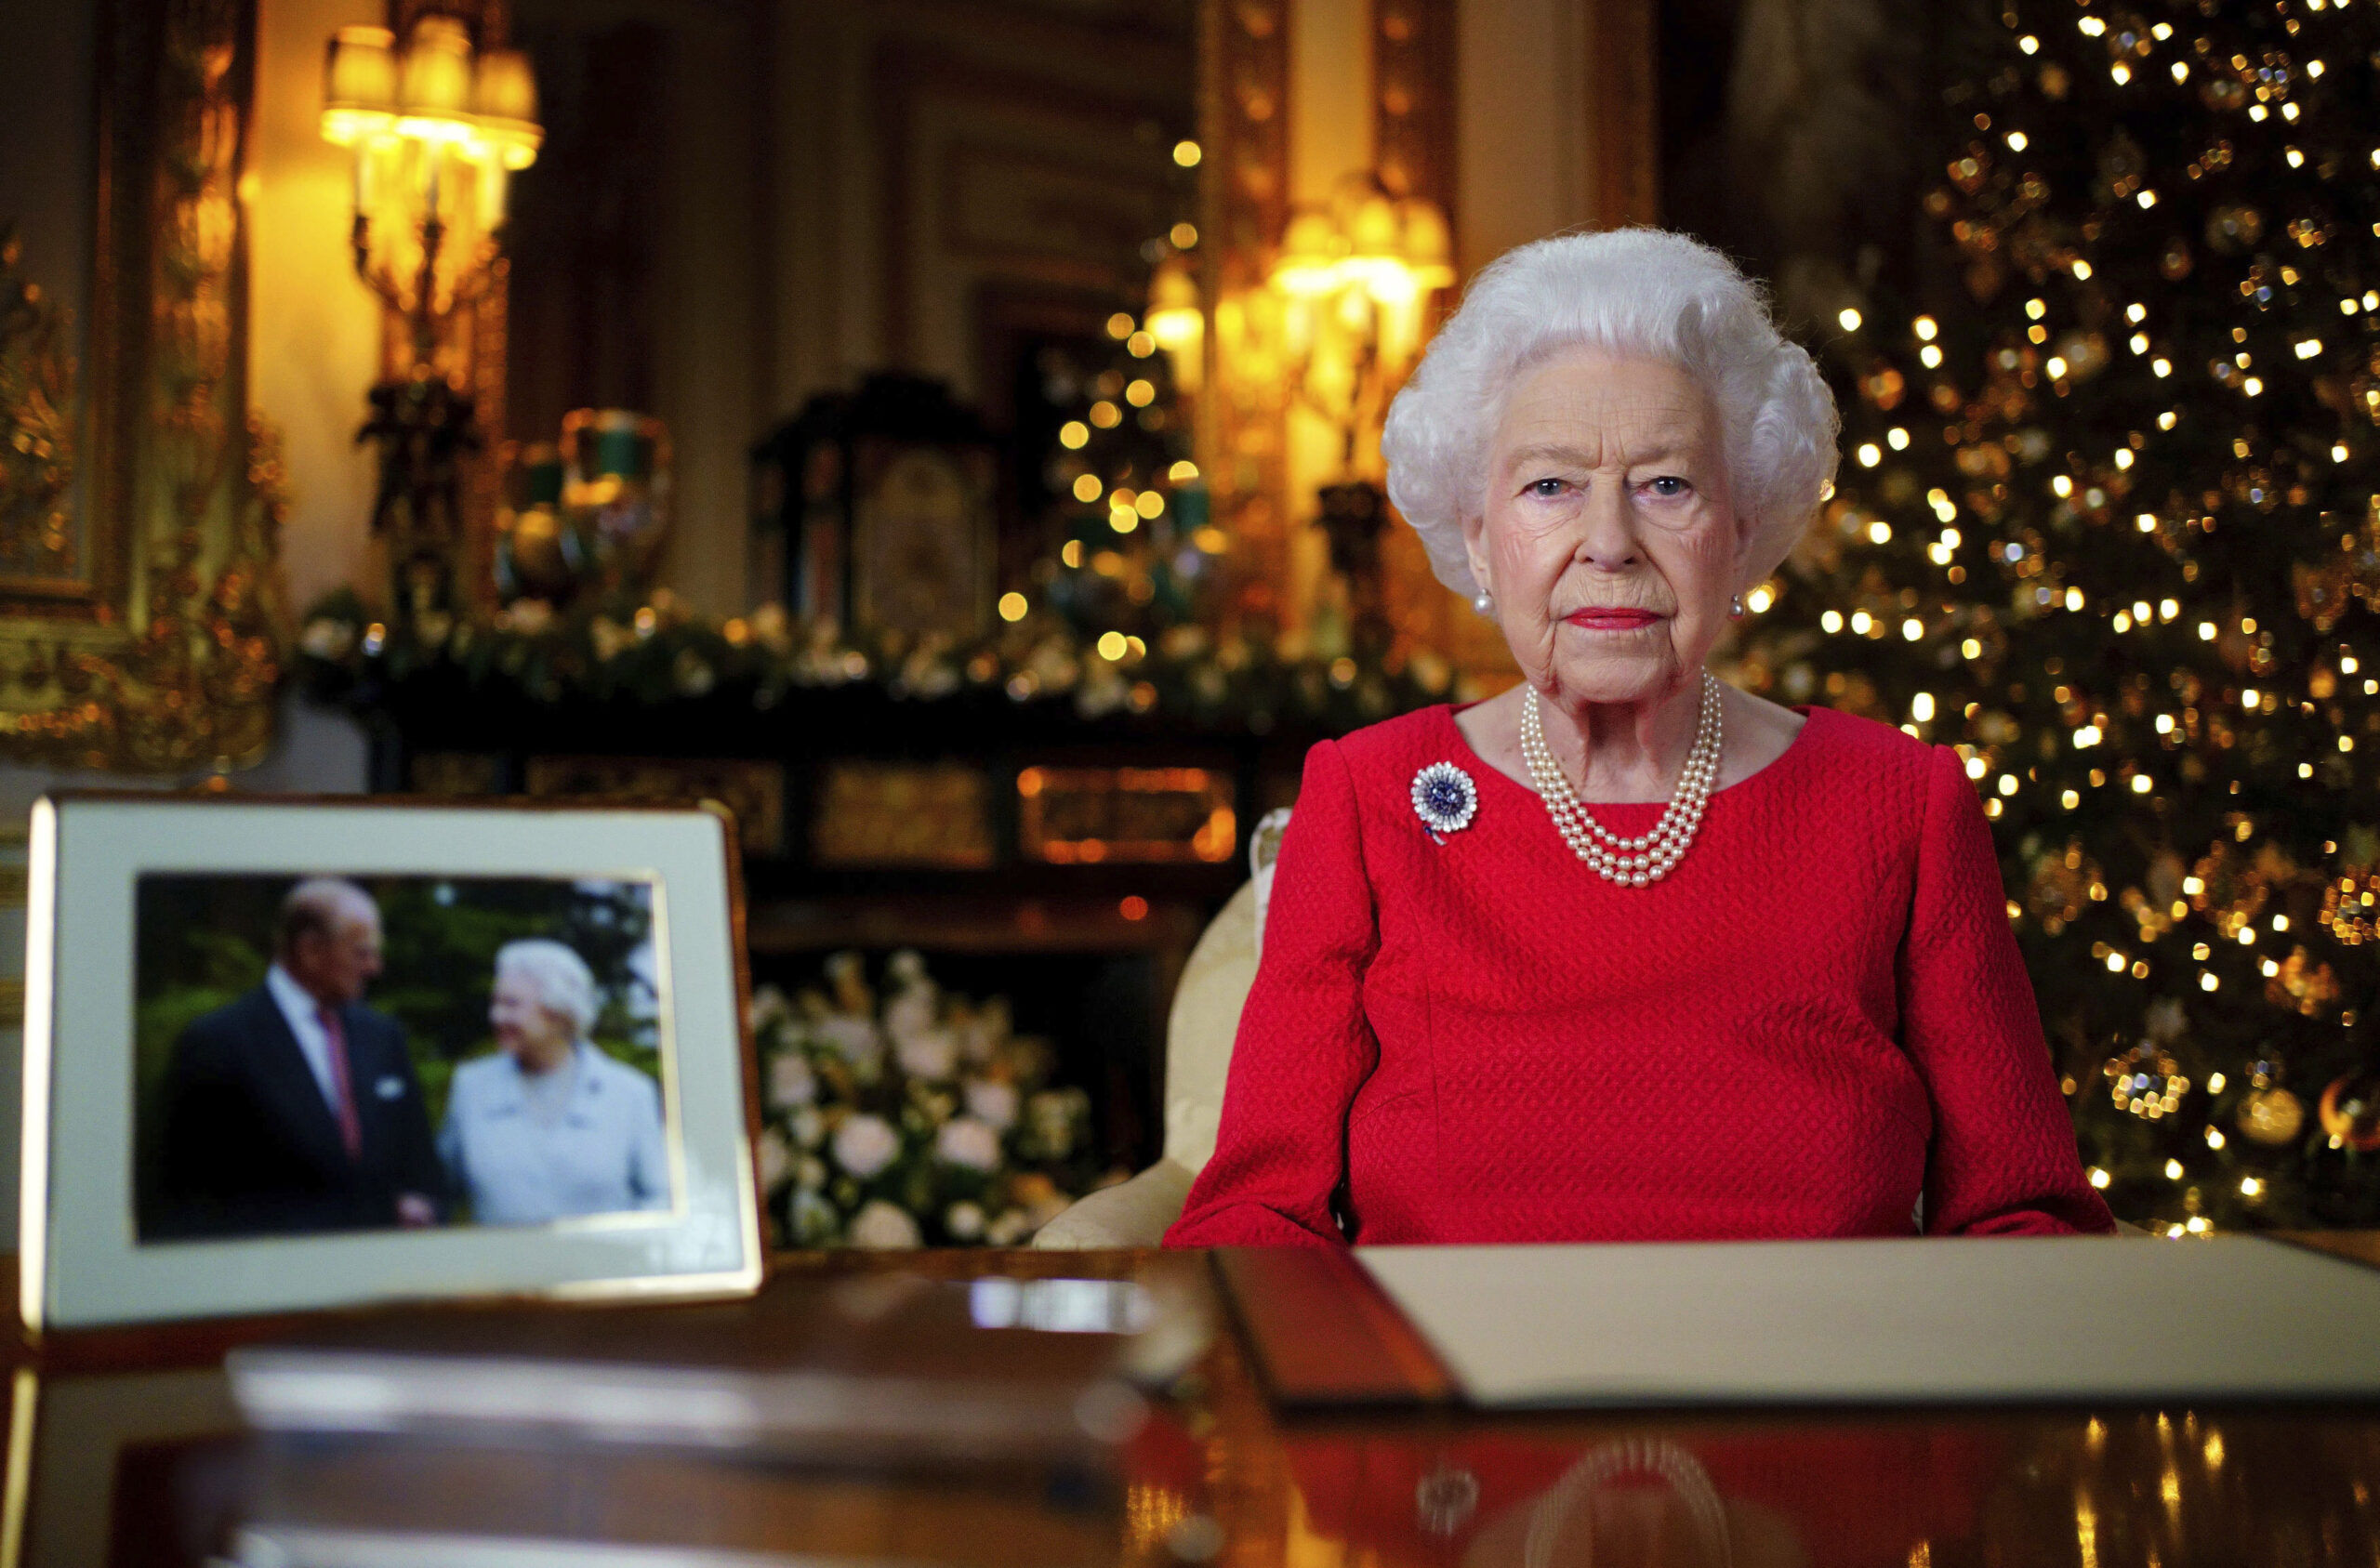 FILE - In this undated photo issued on Dec. 23, 2021, Britain's Queen Elizabeth II records her annual Christmas broadcast in Windsor Castle, Windsor, England. The United Kingdom will celebrate Queen Elizabeth II’s 70 years on the throne with a military parade, neighborhood parties and a competition to create a new dessert for the Platinum Jubilee, Buckingham Palace said Monday, Jan. 10, 2022. (Victoria Jones/Pool Photo via AP, File)